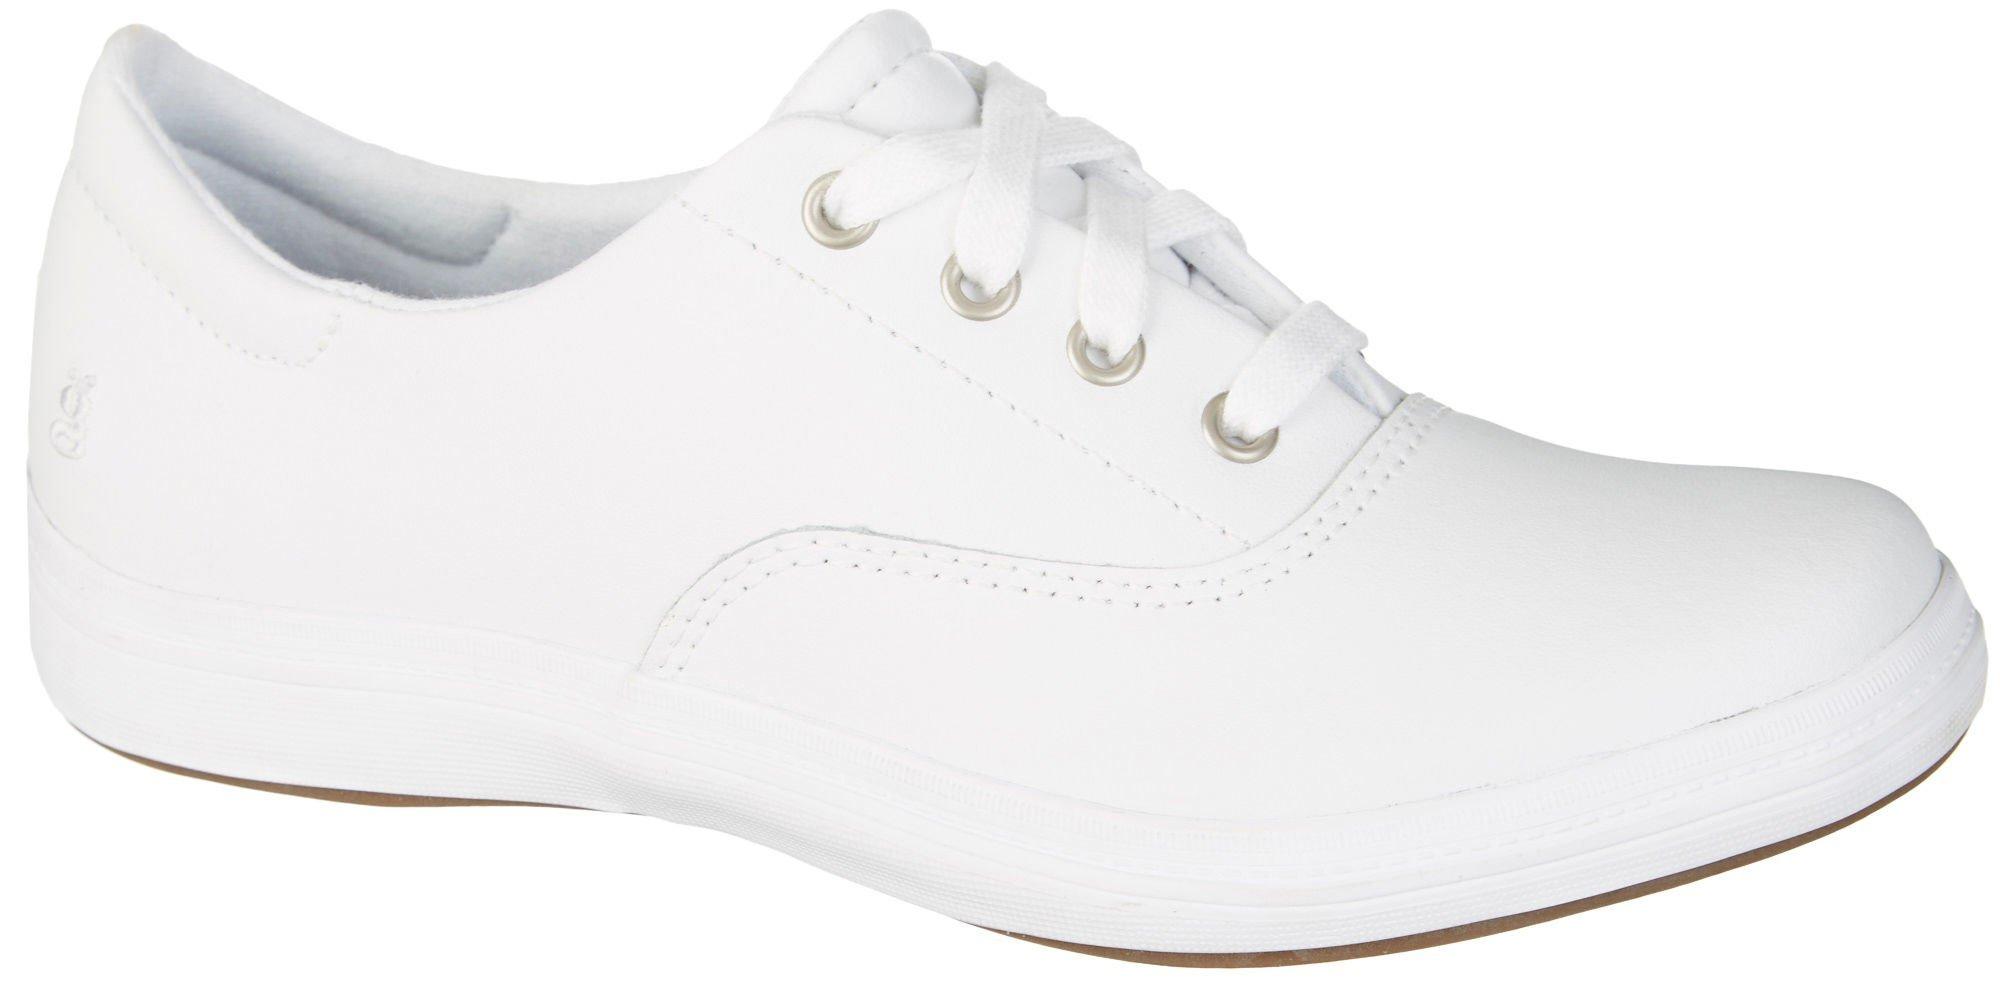 white leather grasshopper shoes